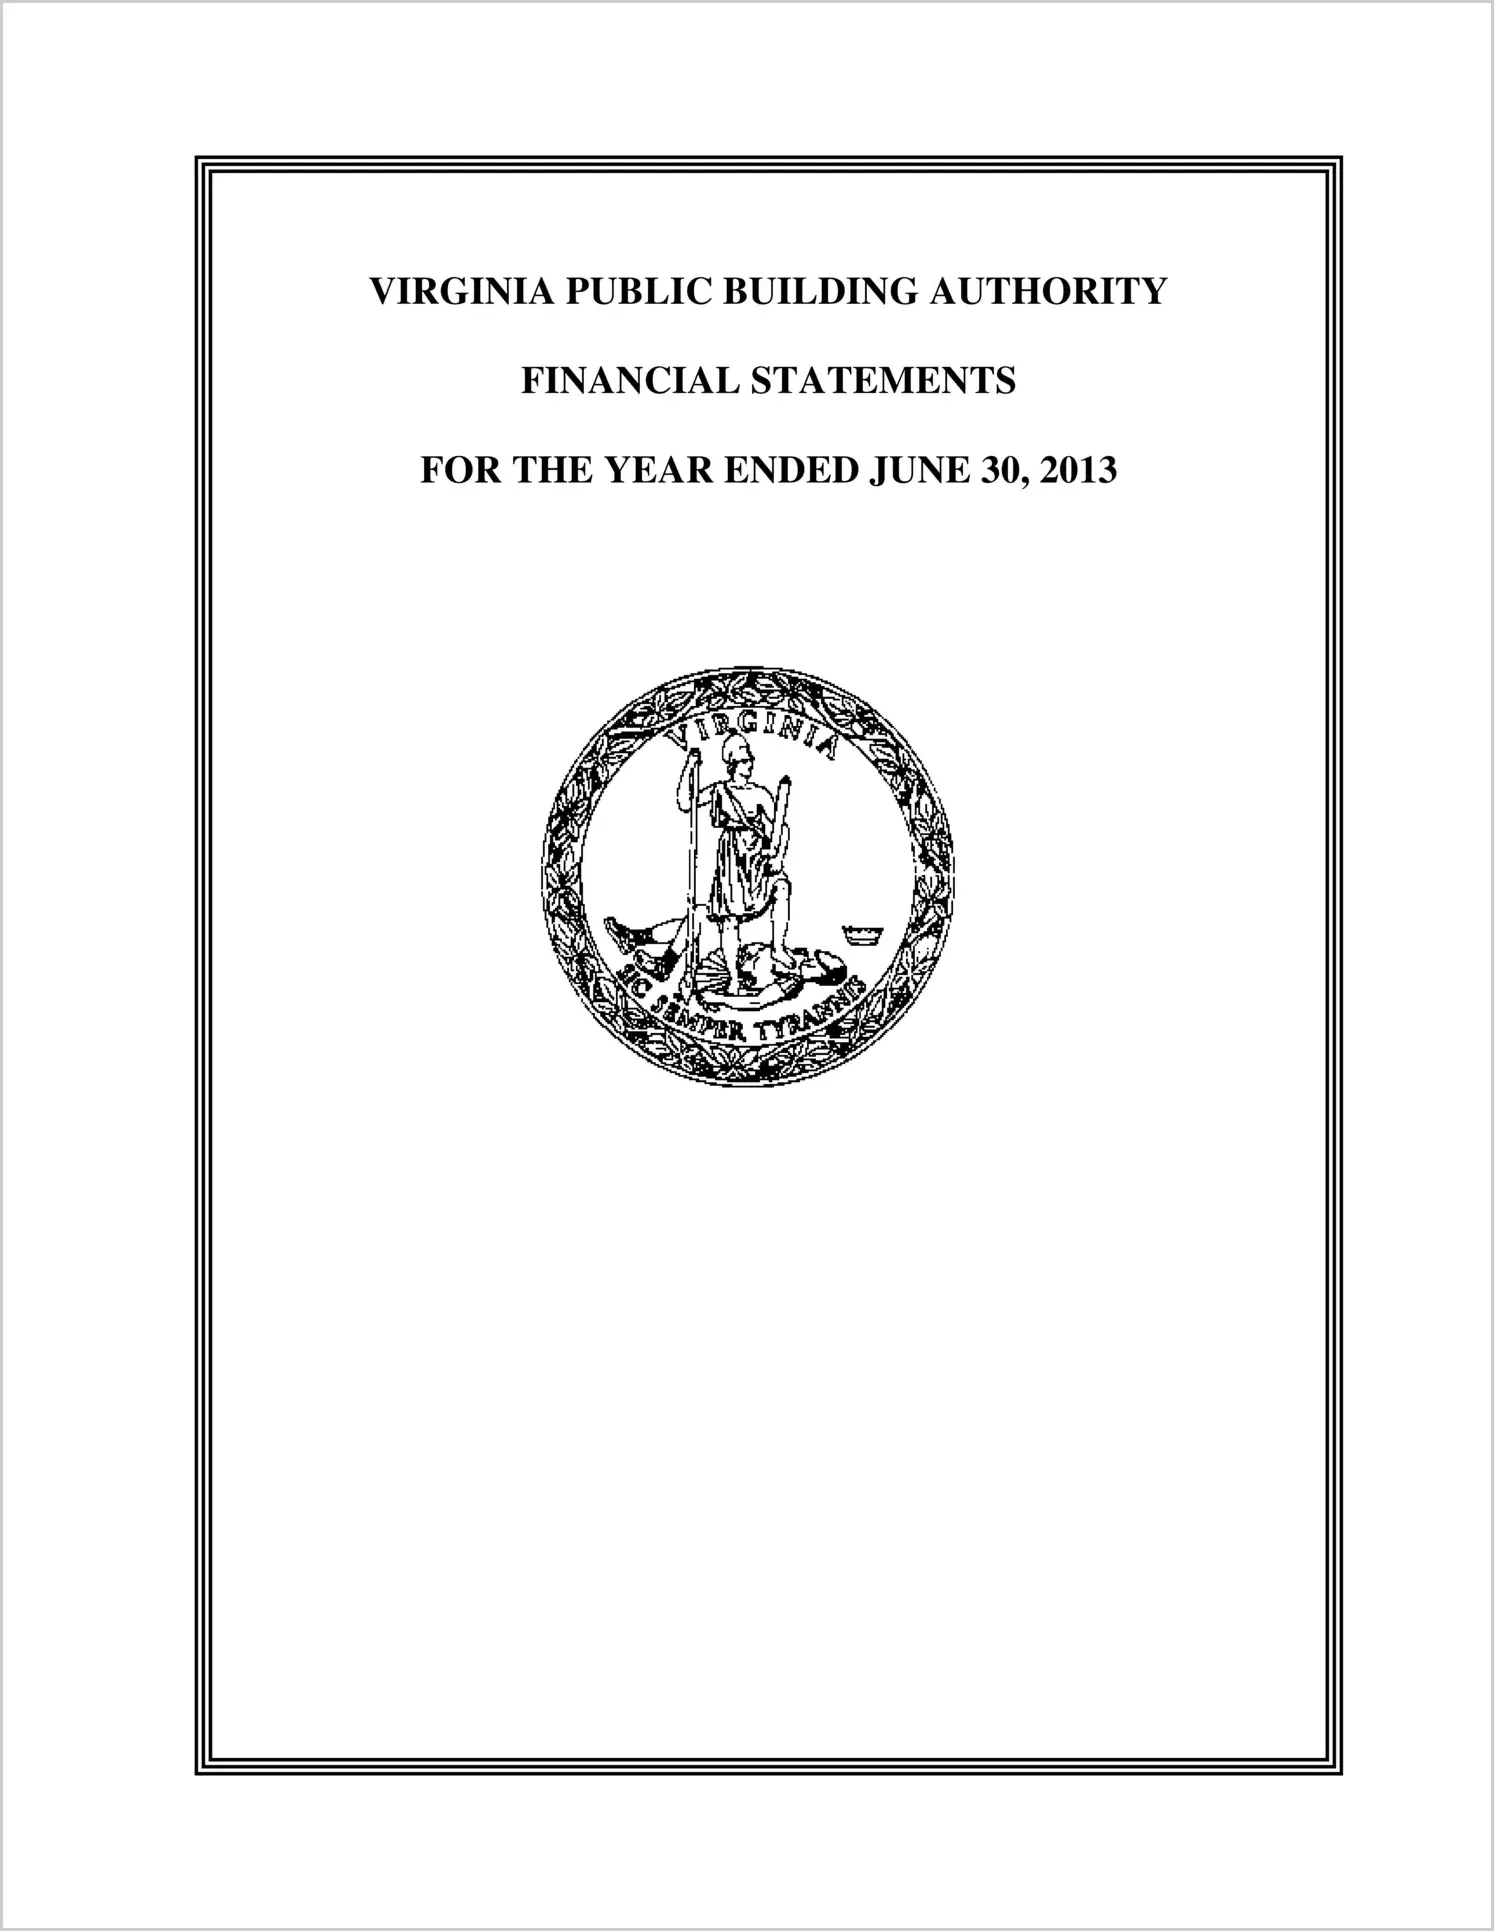 Virginia Public Building Authority Financial Statements for the year ended June 30, 2013